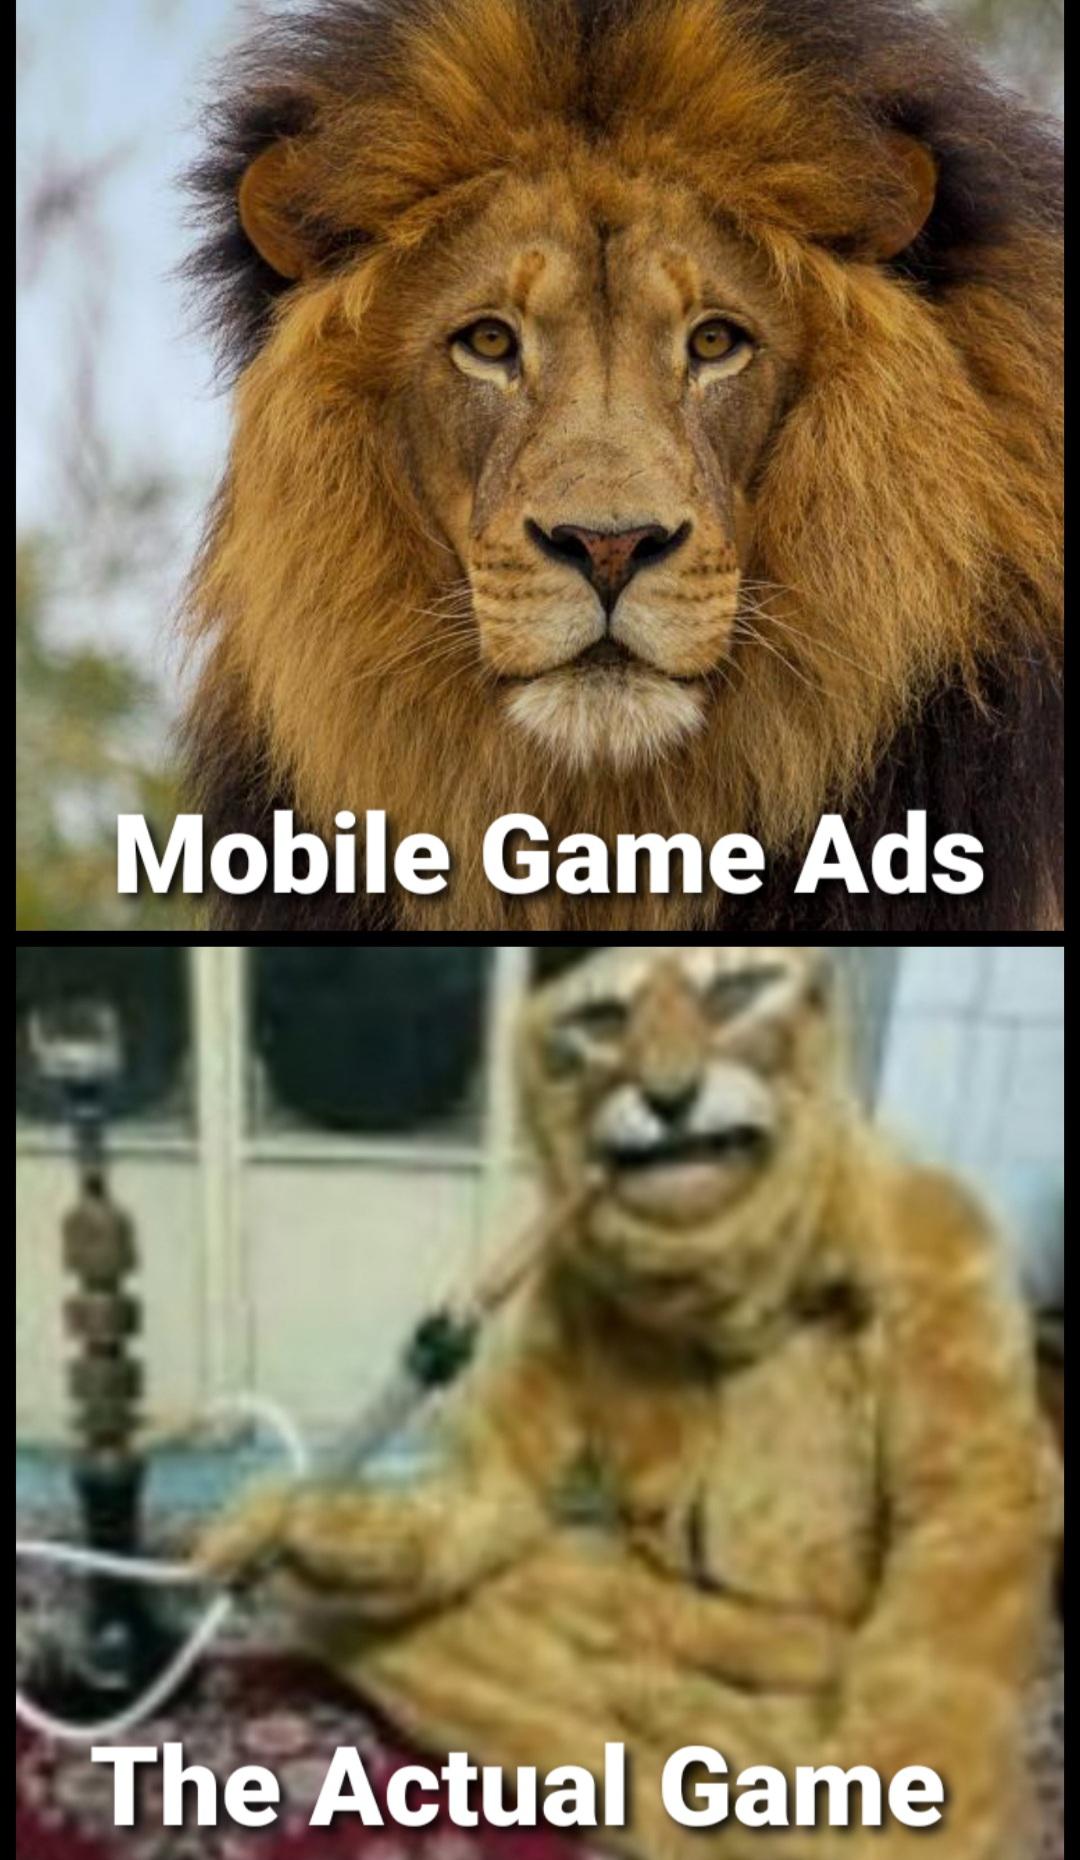 Mobile Game Ads The Actual Game